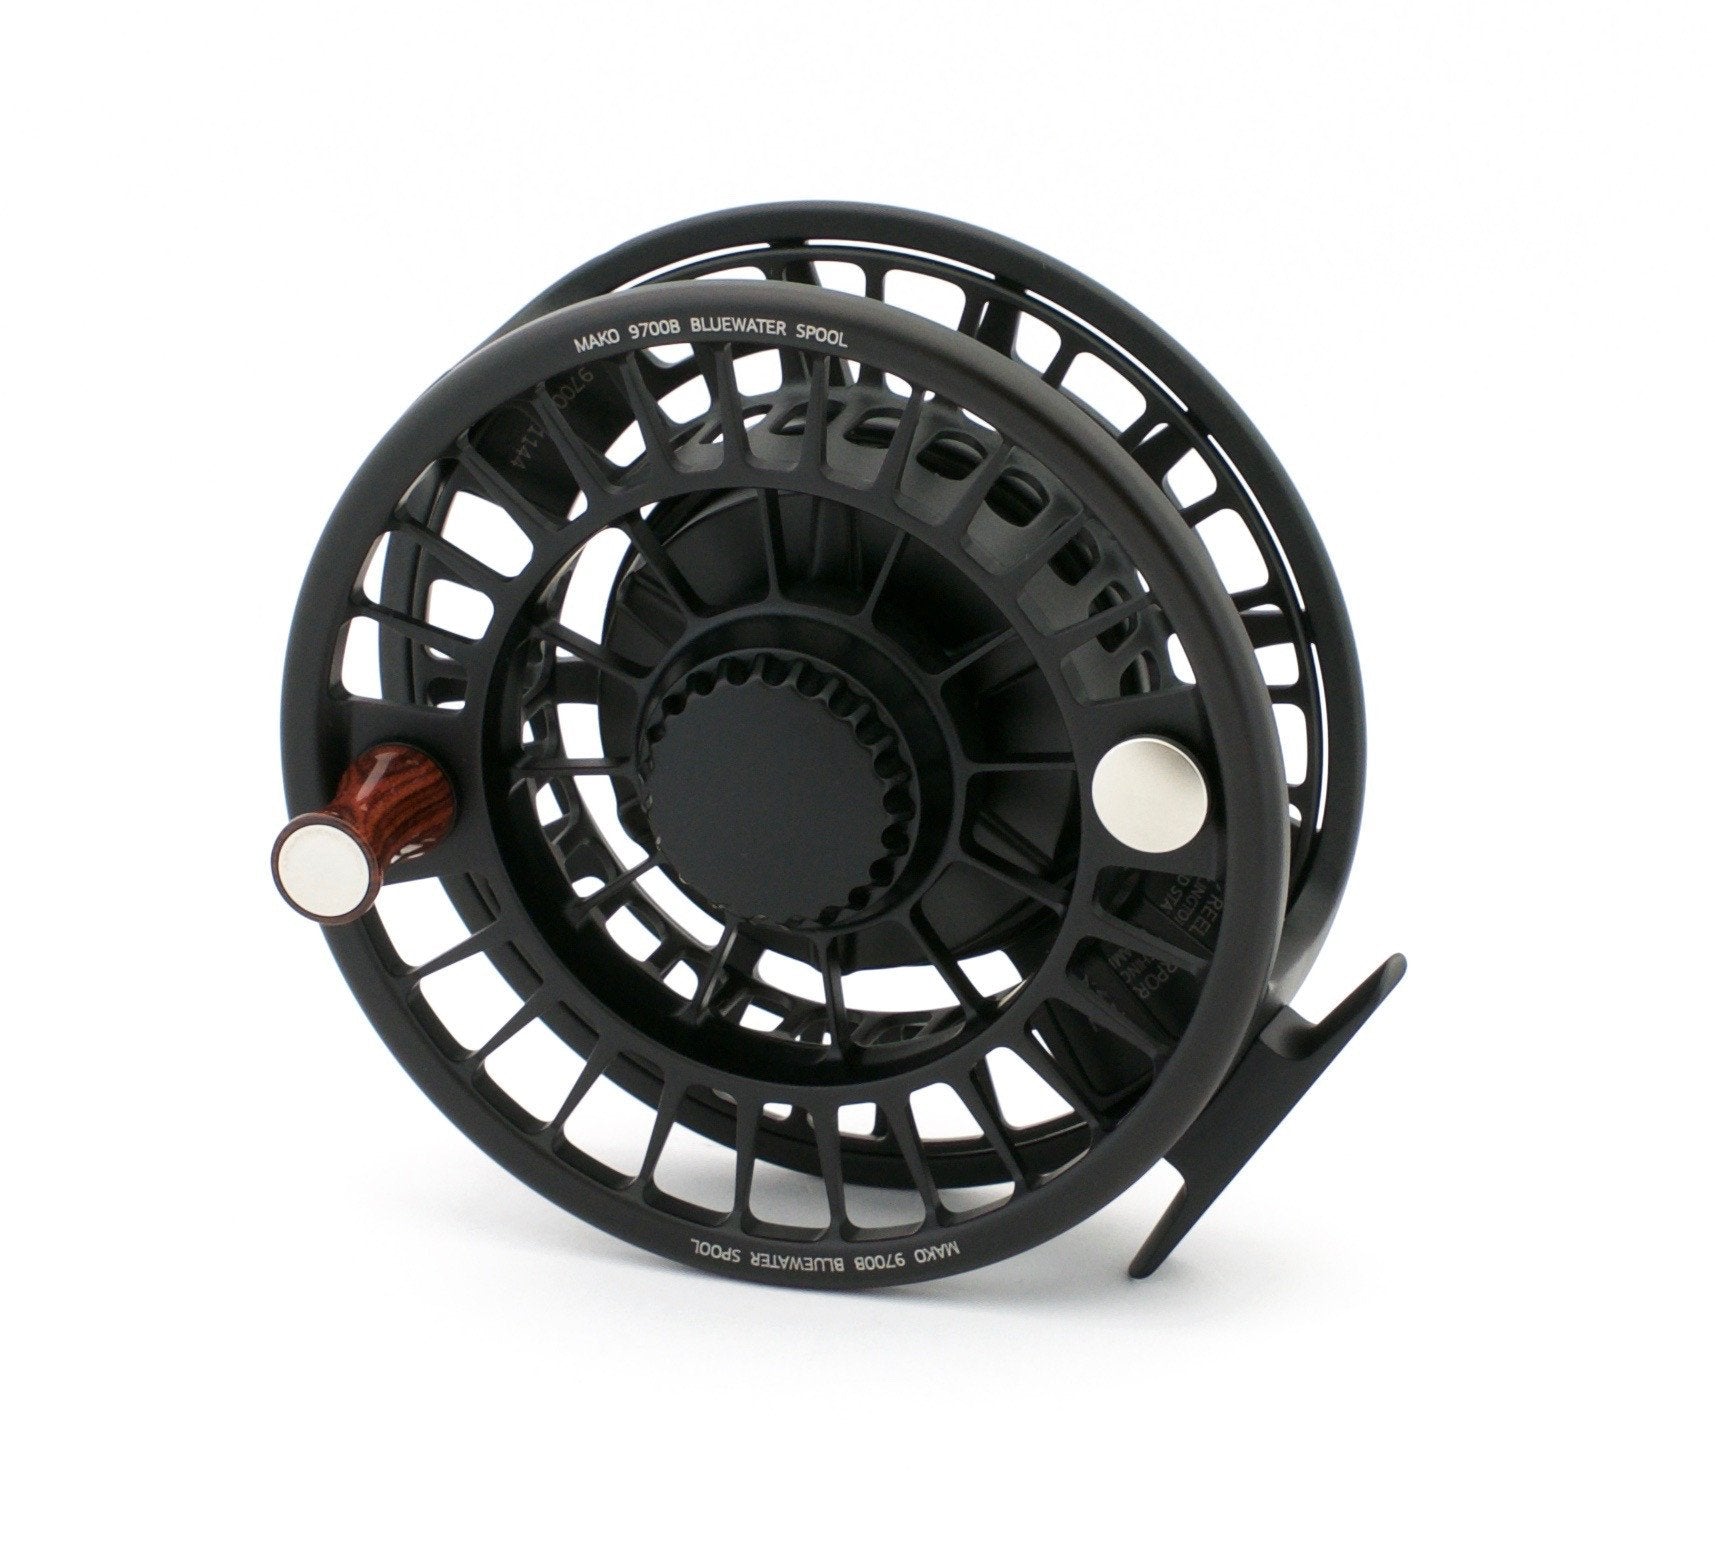 Charlton Mako Fly Reel - Model 9500 Stealth with 8/10 and 8S